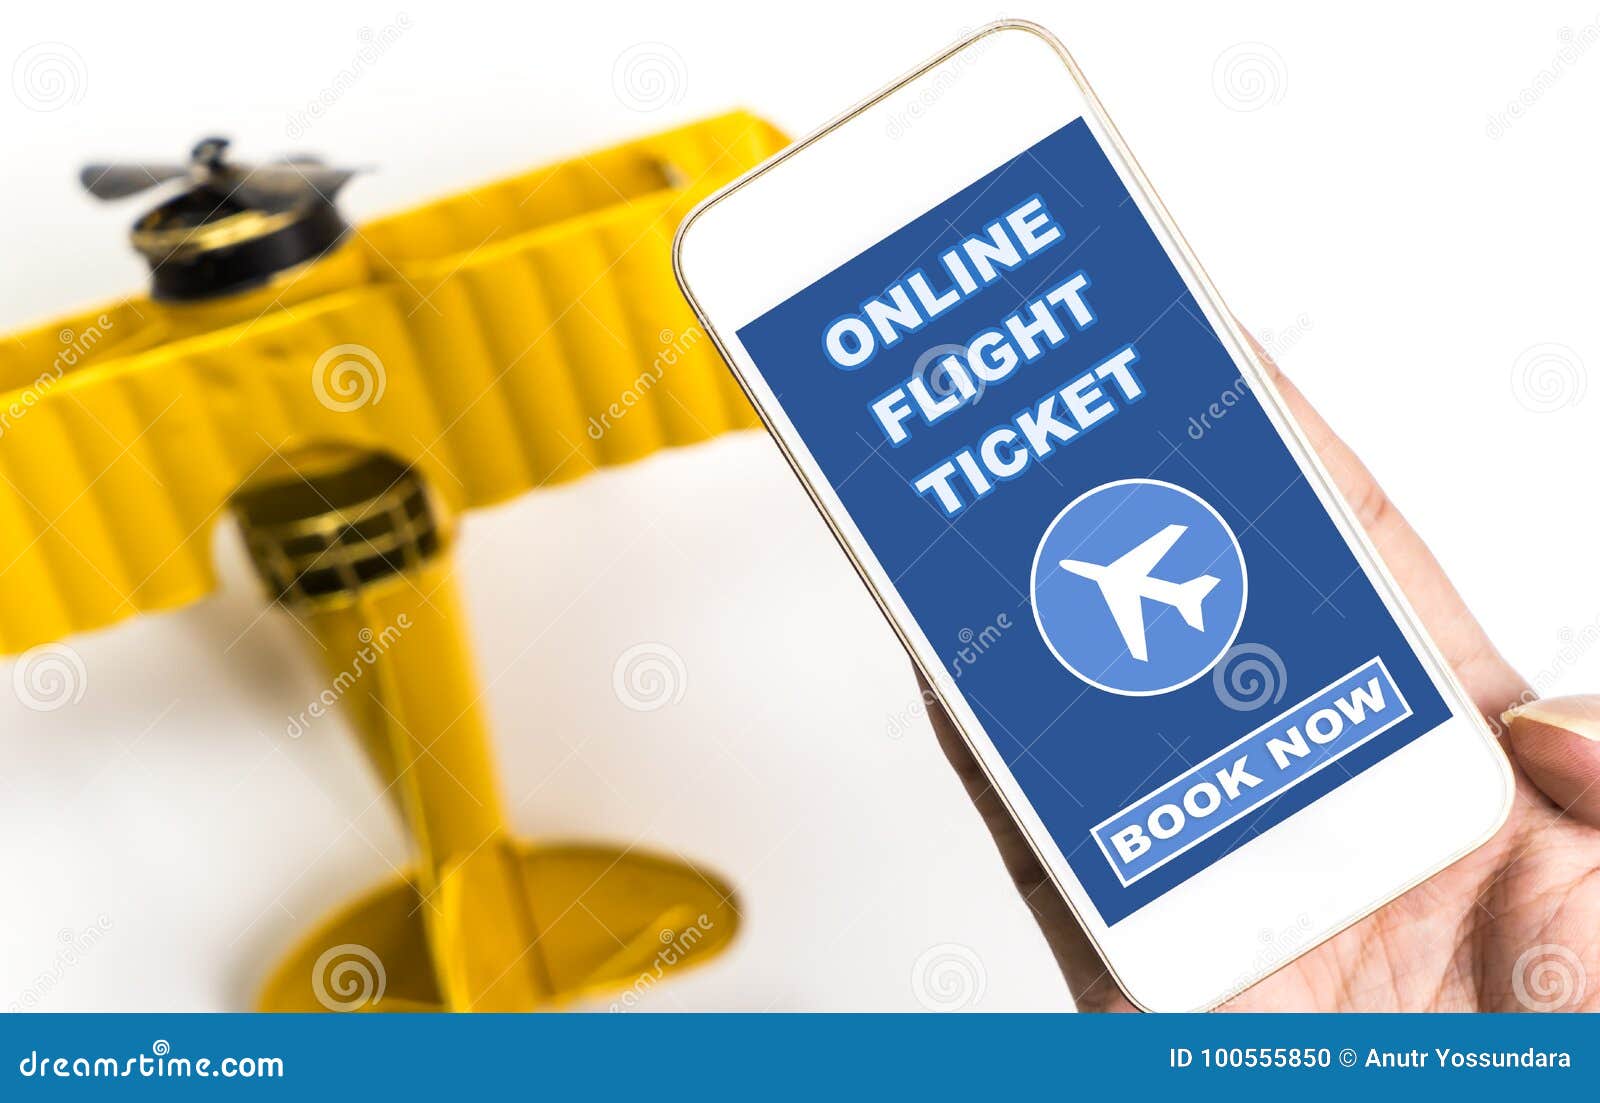 Phone Dillingham flight booking by to Dillingham ticket